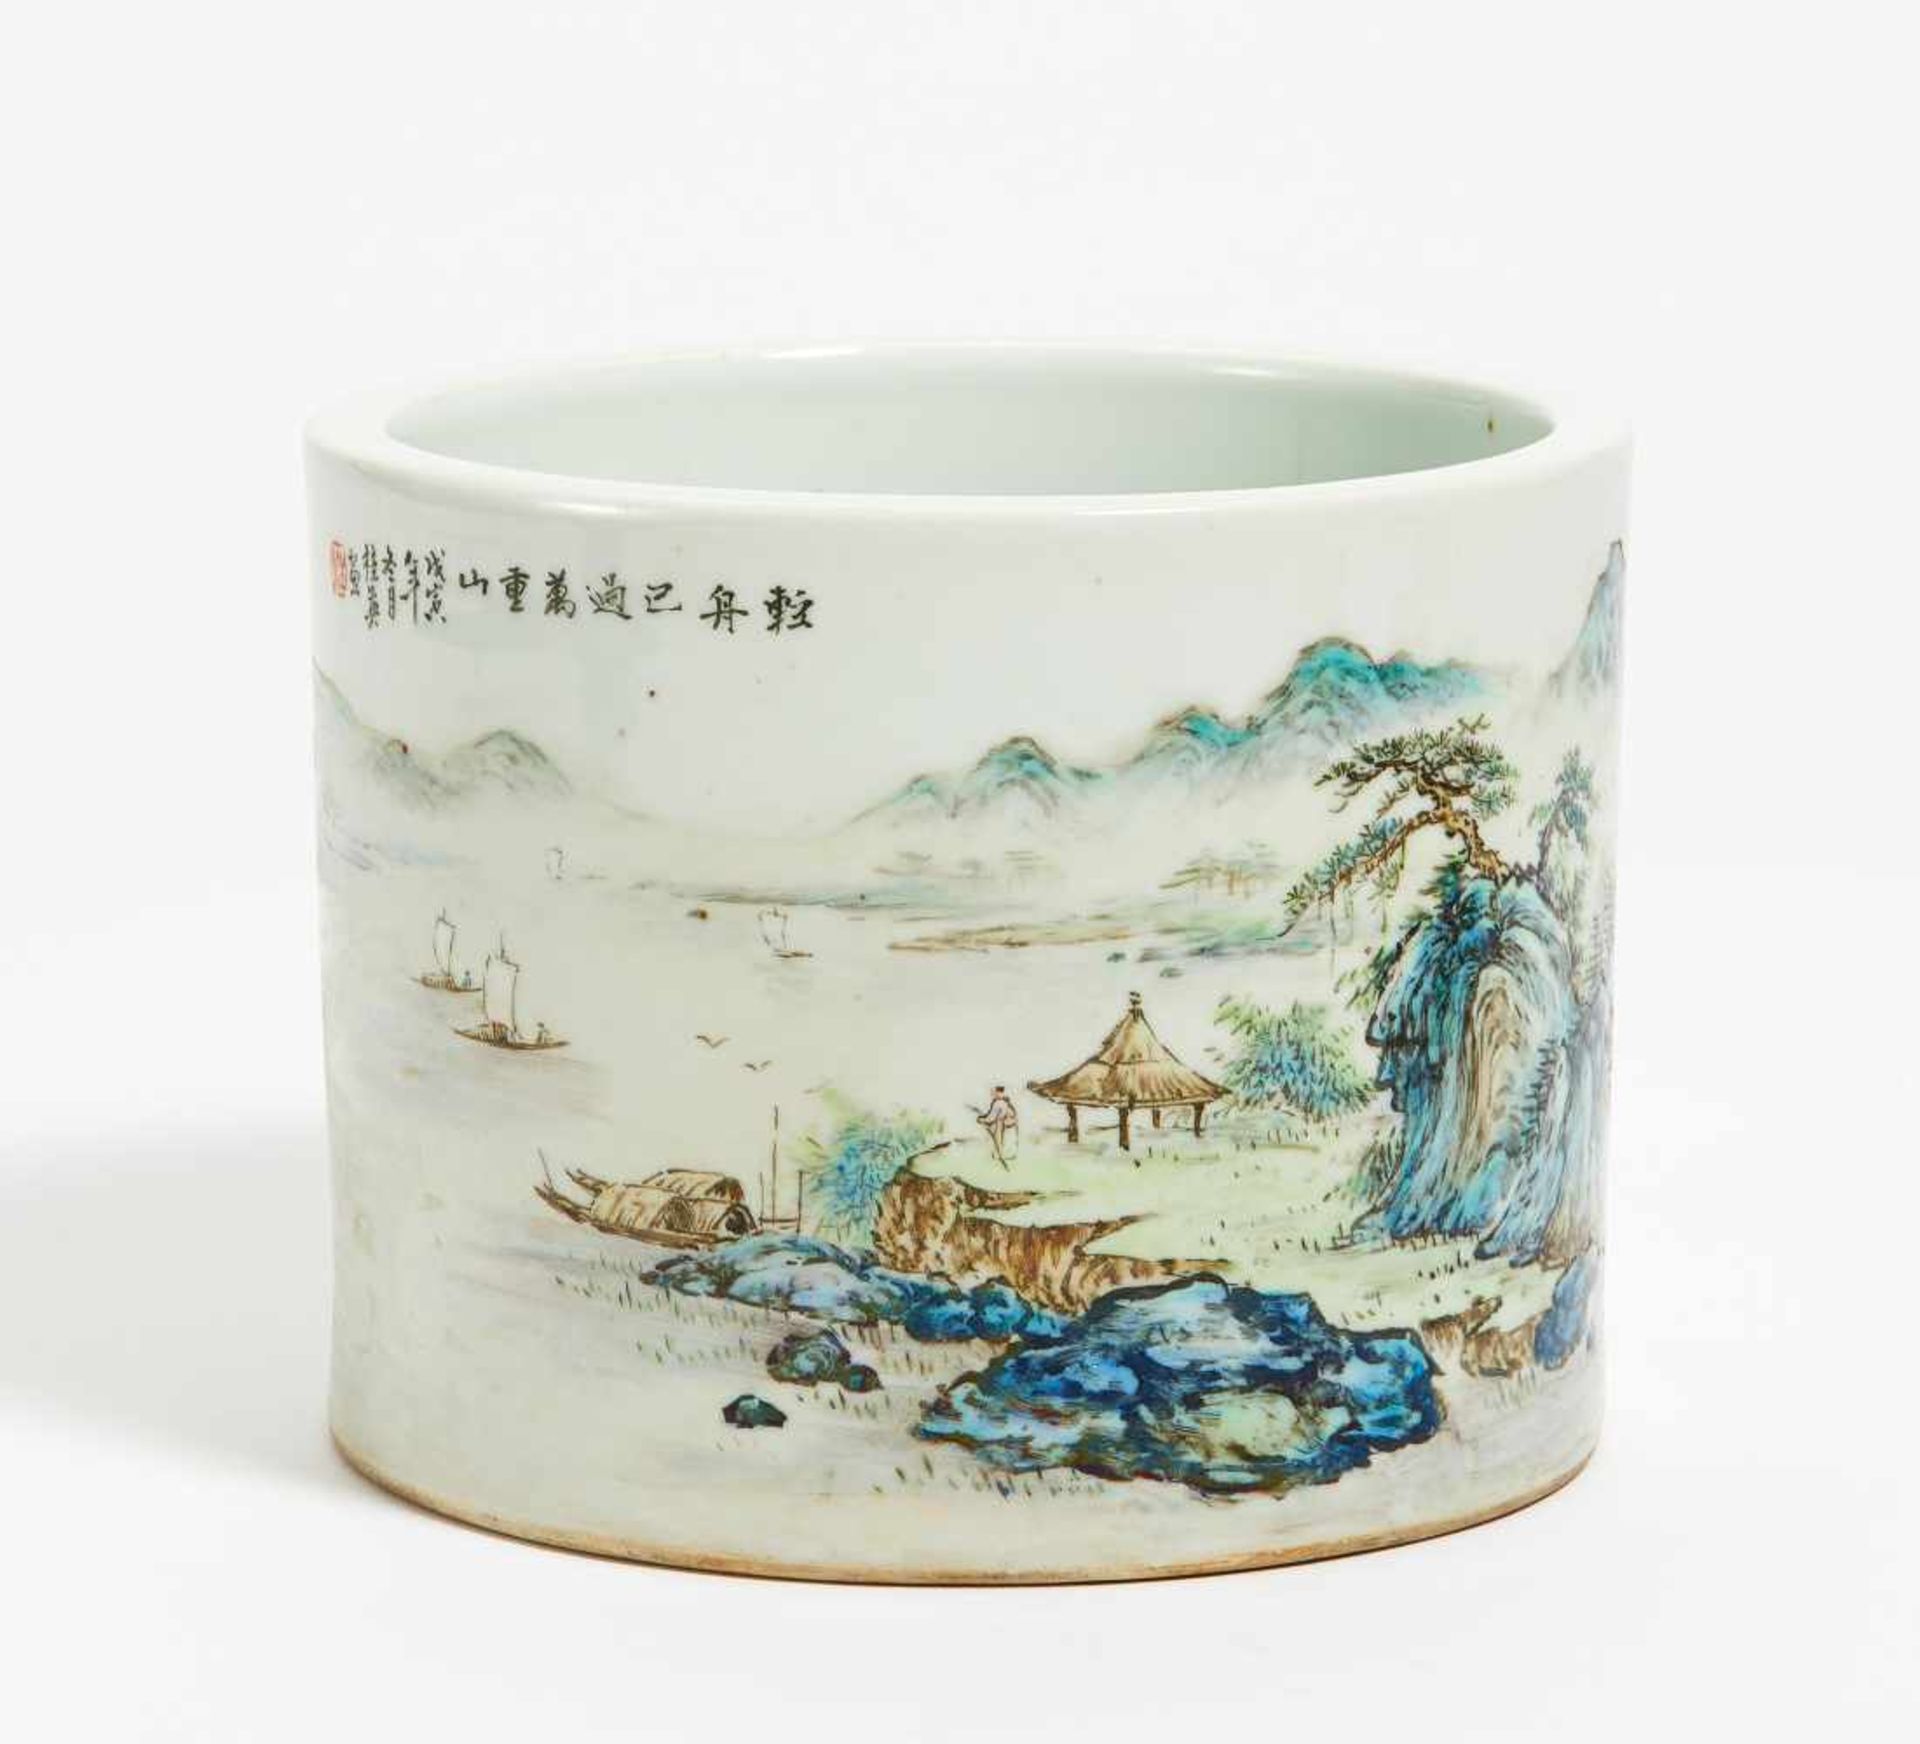 LARGE BRUSHPOT WITH LANDSCAPE. China. 20th c. In the style of Wang Guiying (1931-2012). Heavy